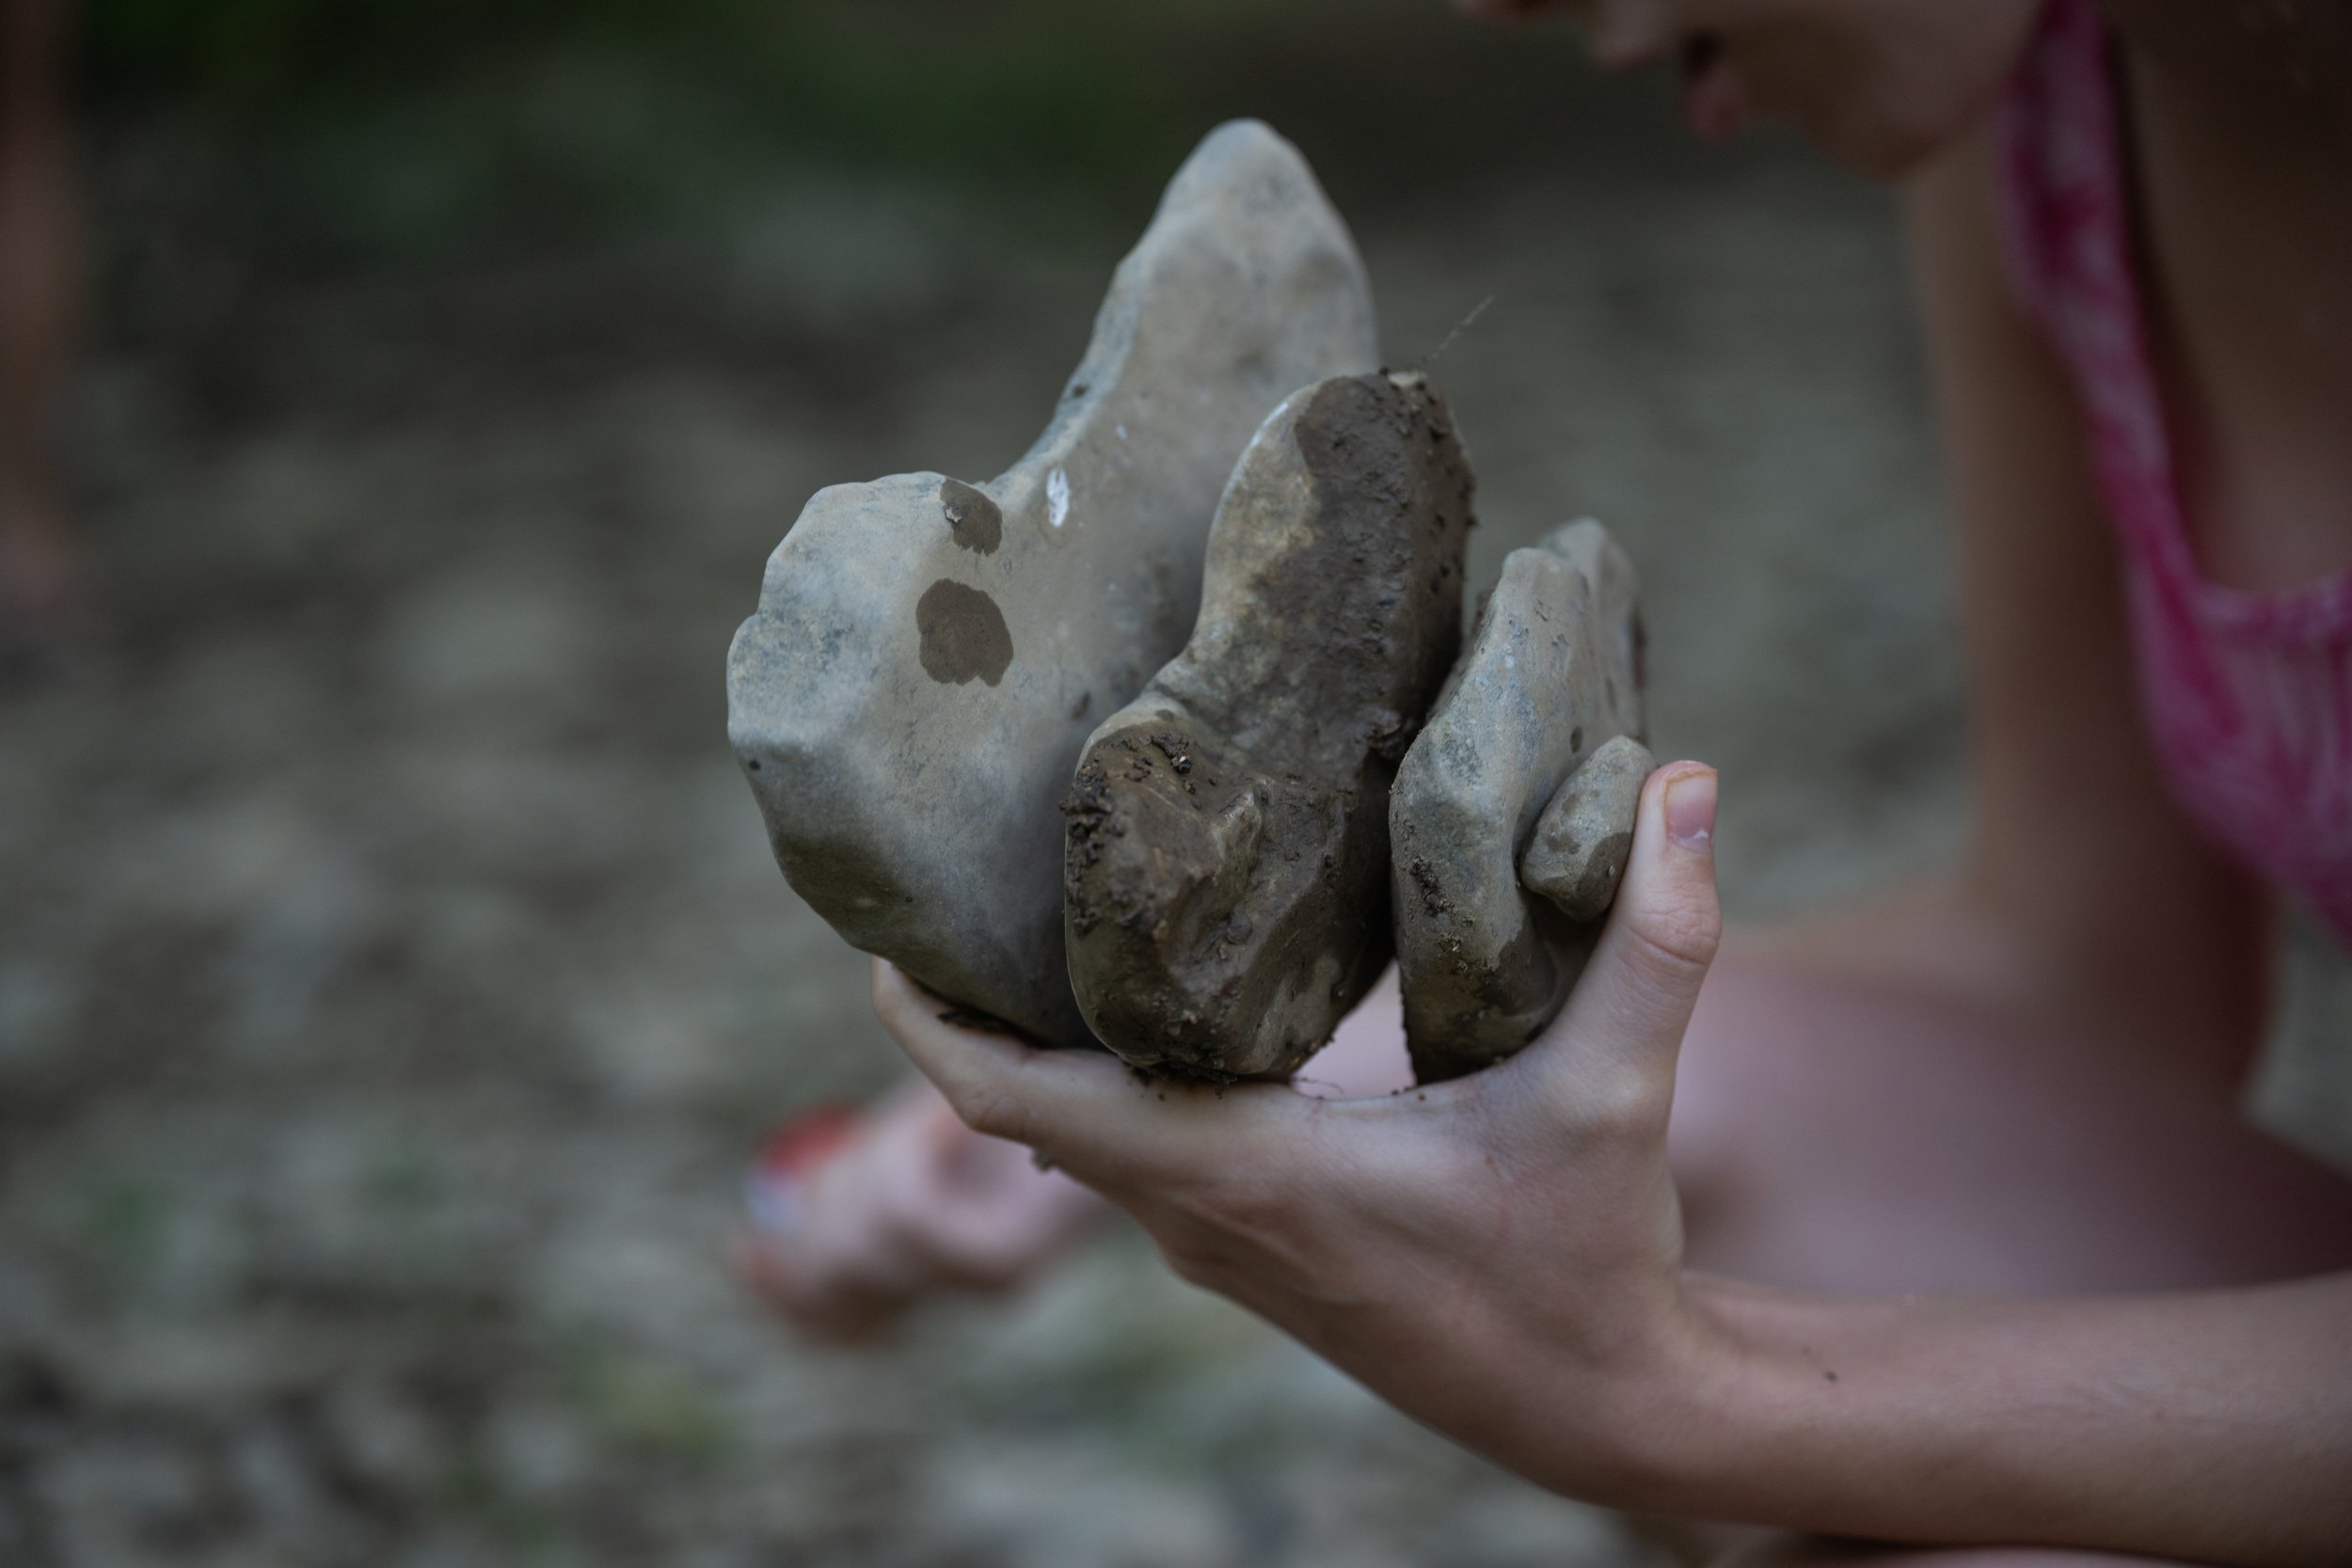  7/7/23 -- Cynthiana, Kentucky —  Ashlynn McNees, 18, holds a stack of heart-shaped rocks in her hand by the South Fork Licking River in Cynthiana, KY on July 7, 2023. 